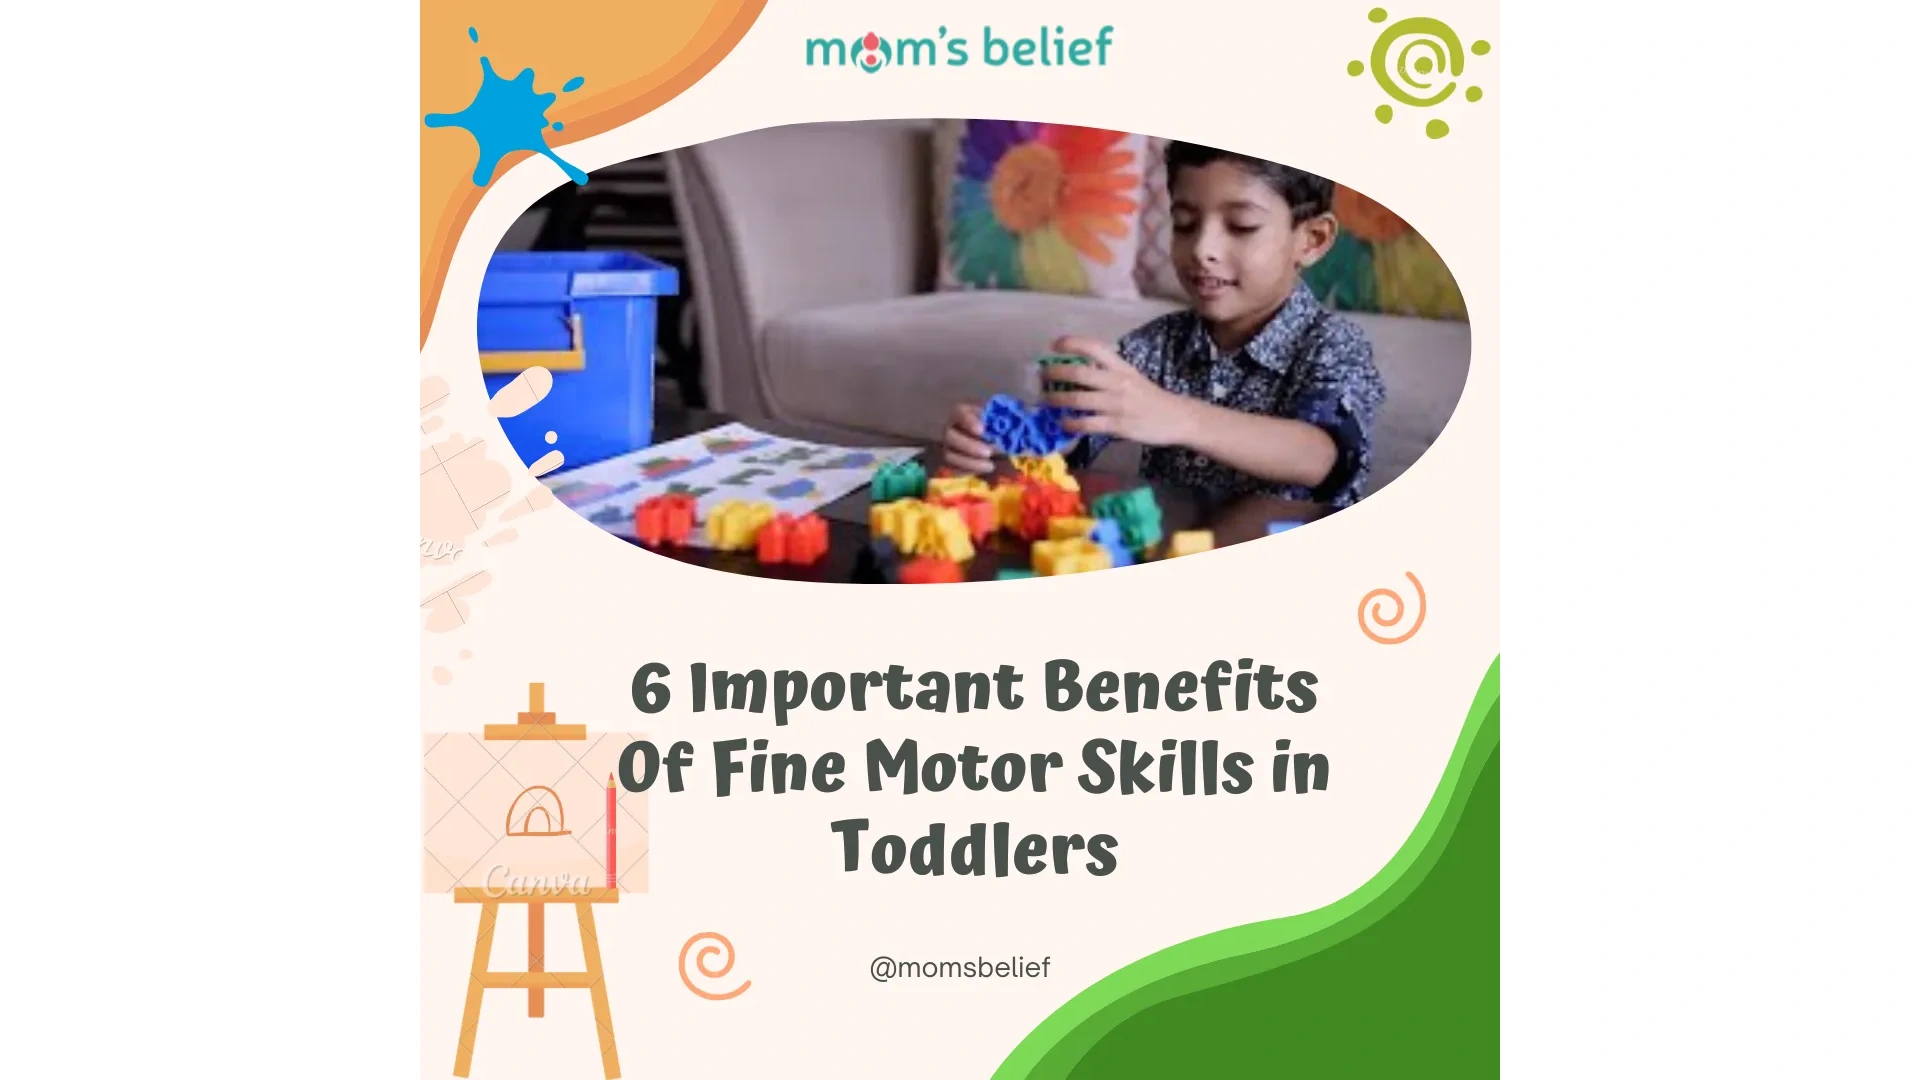 6 Important Benefits Of Developing Fine Motor Skills in Toddlers